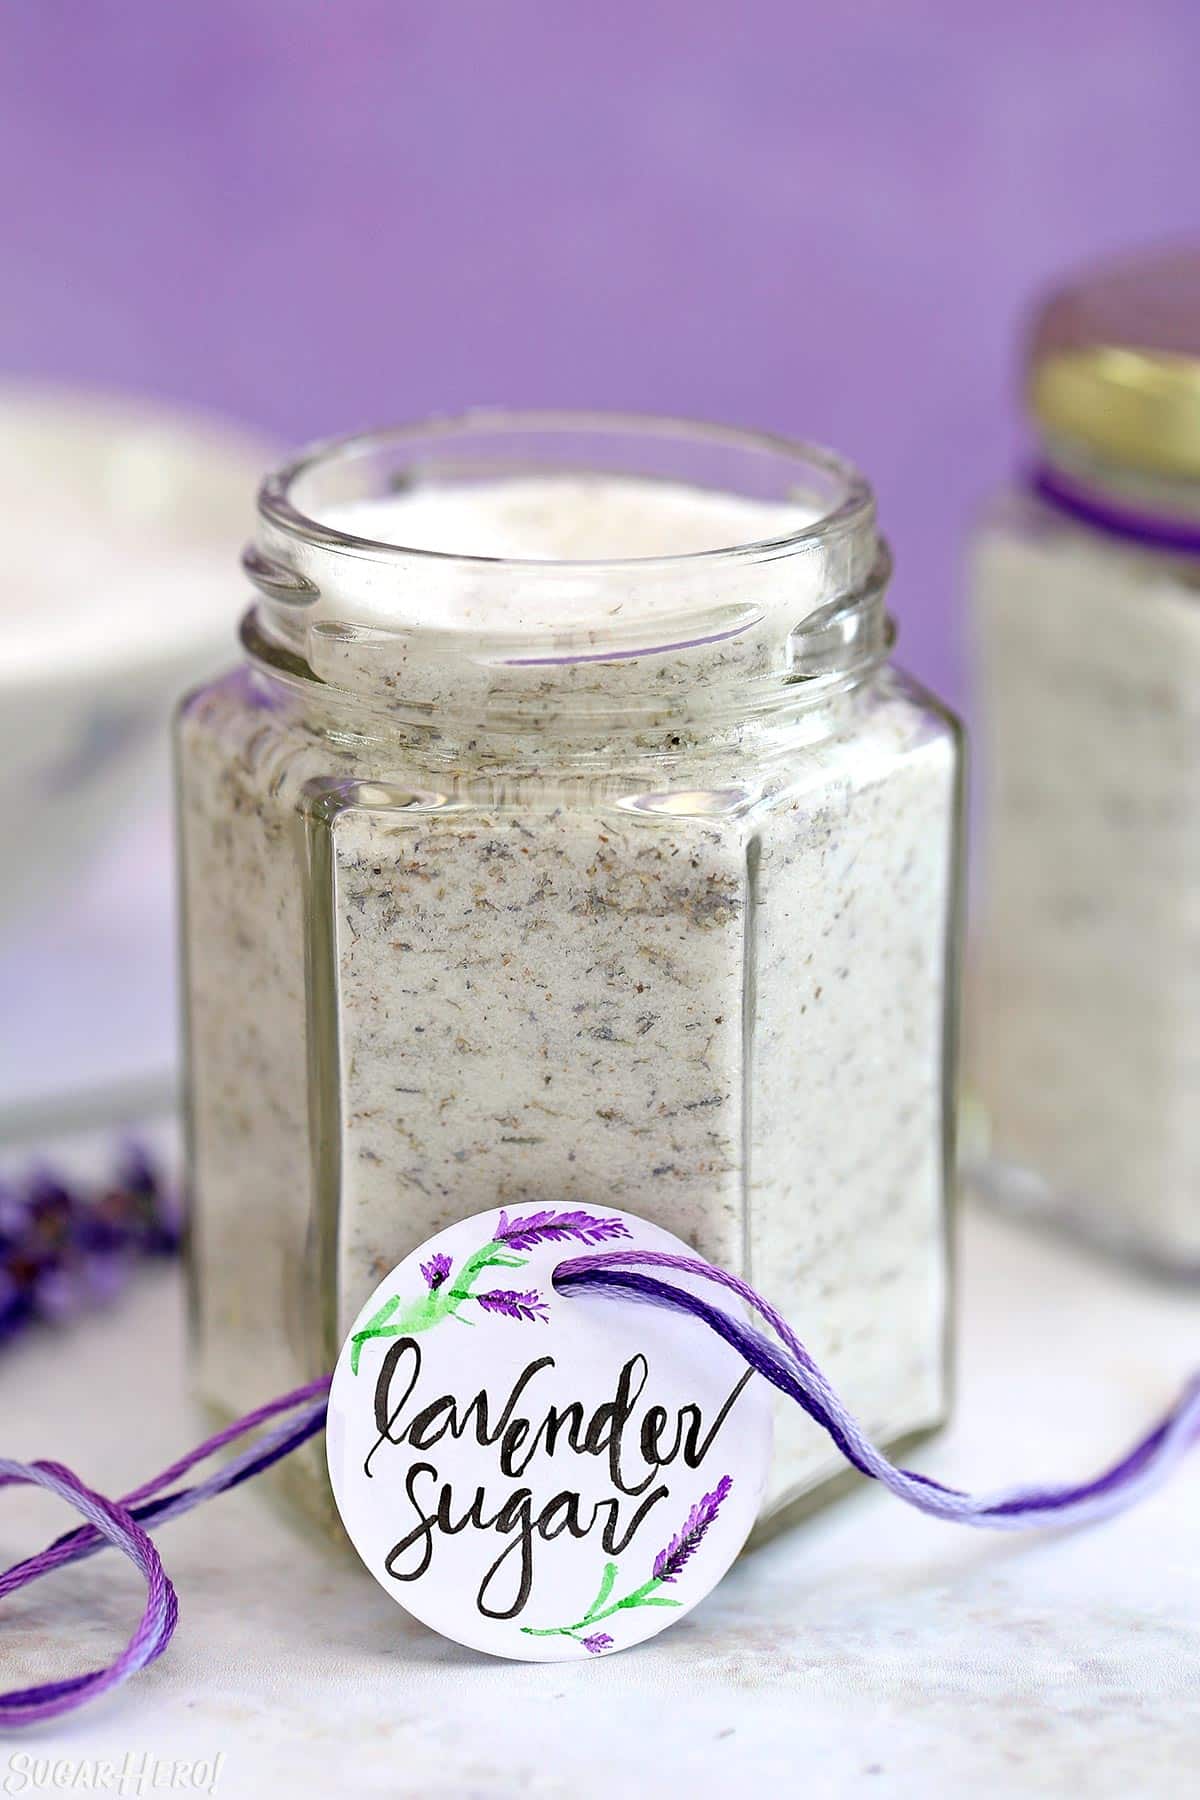 Hexagonal glass jar filled with lavender sugar, on a marble surface with a purple background.